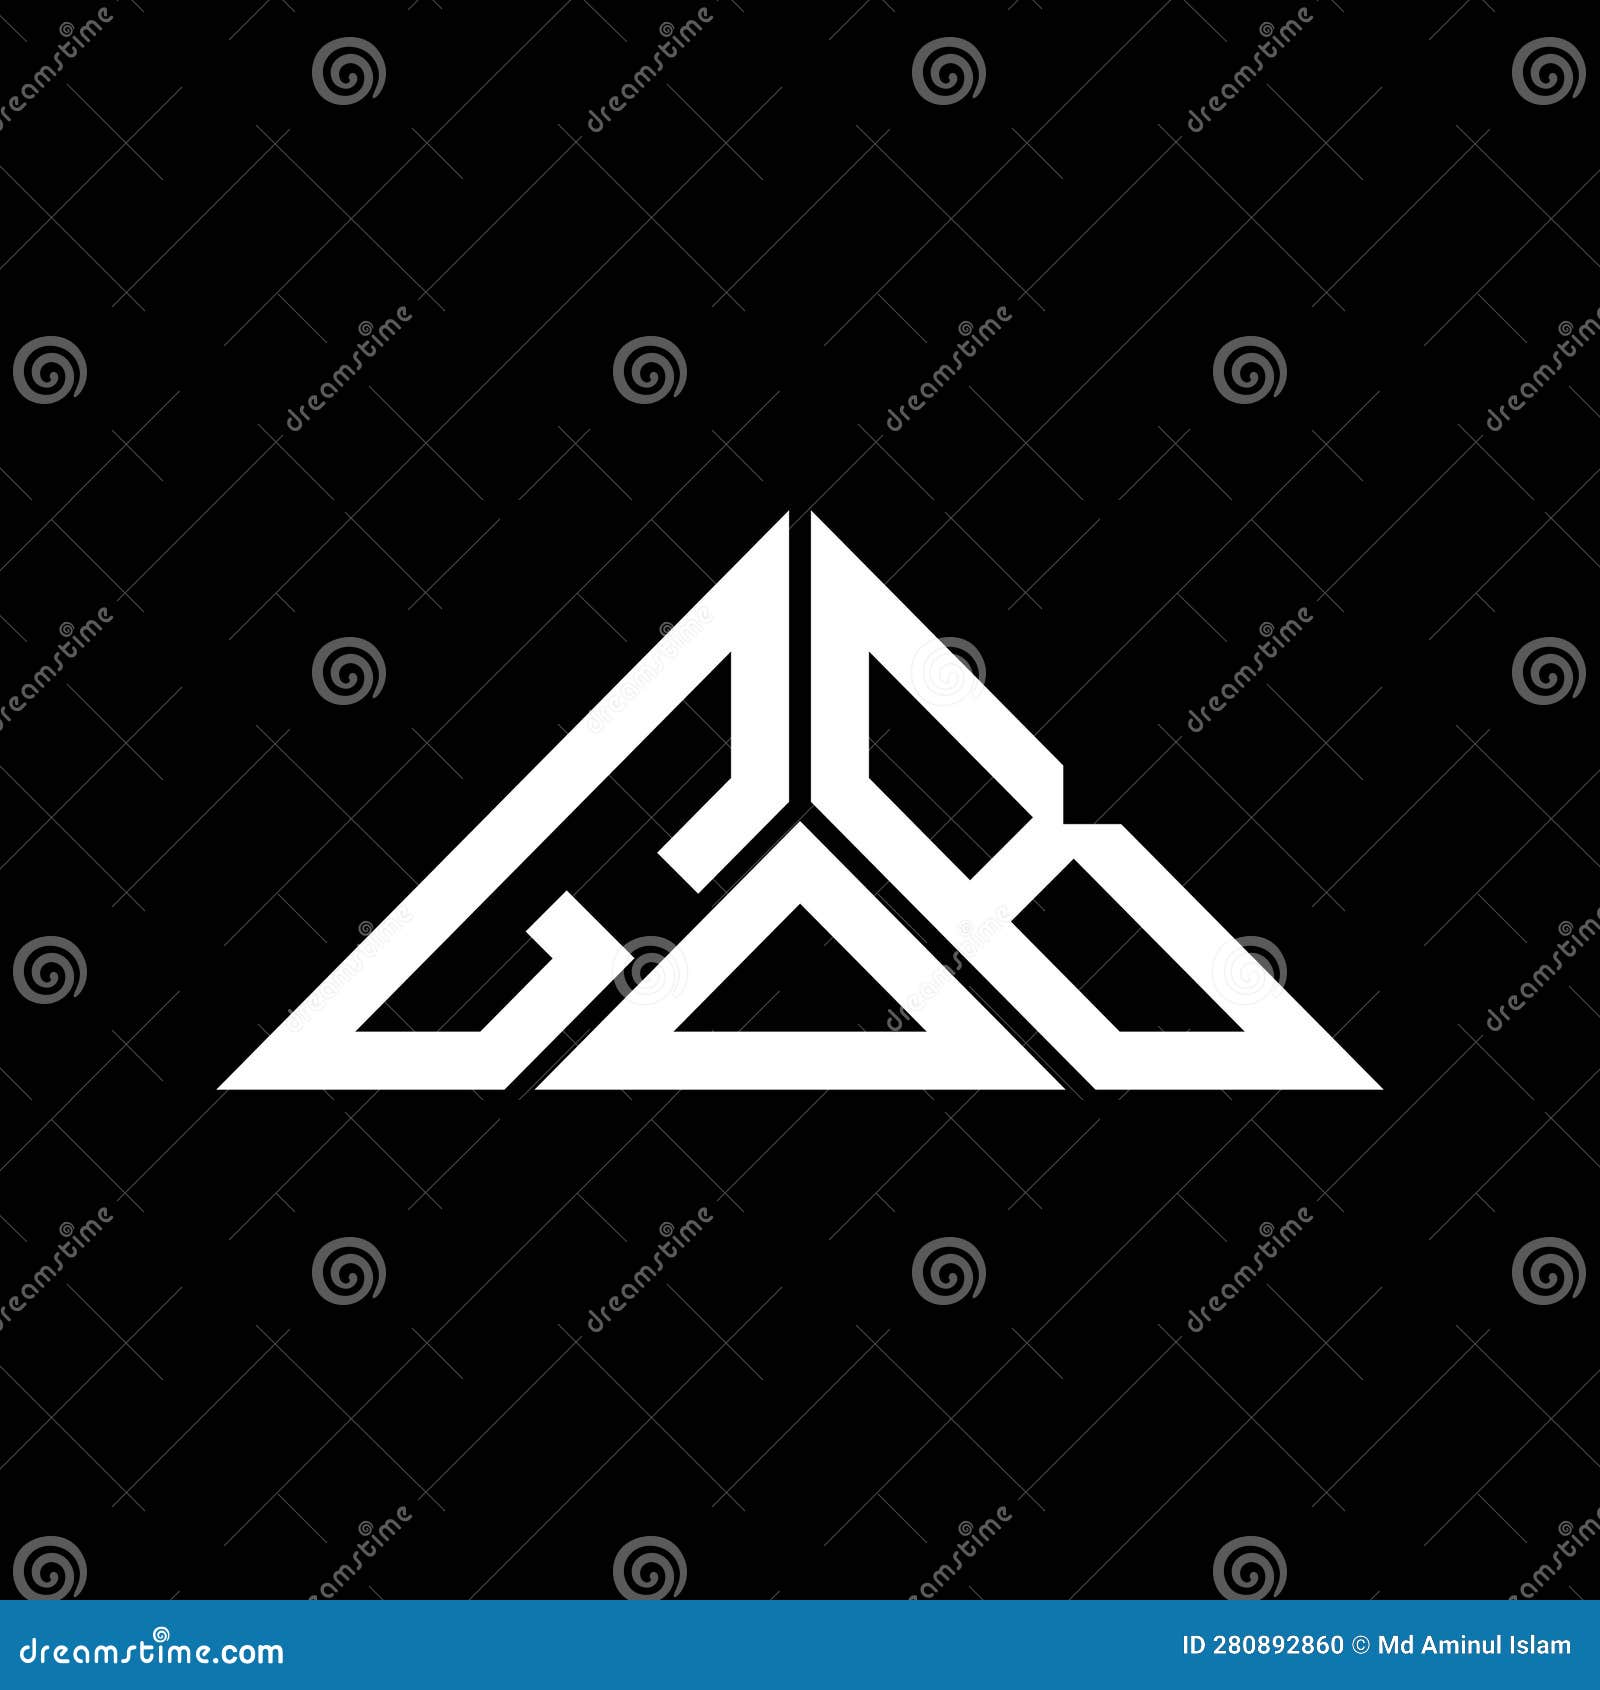 gob letter logo creative  with  graphic, gob simple and modern logo in triangle 